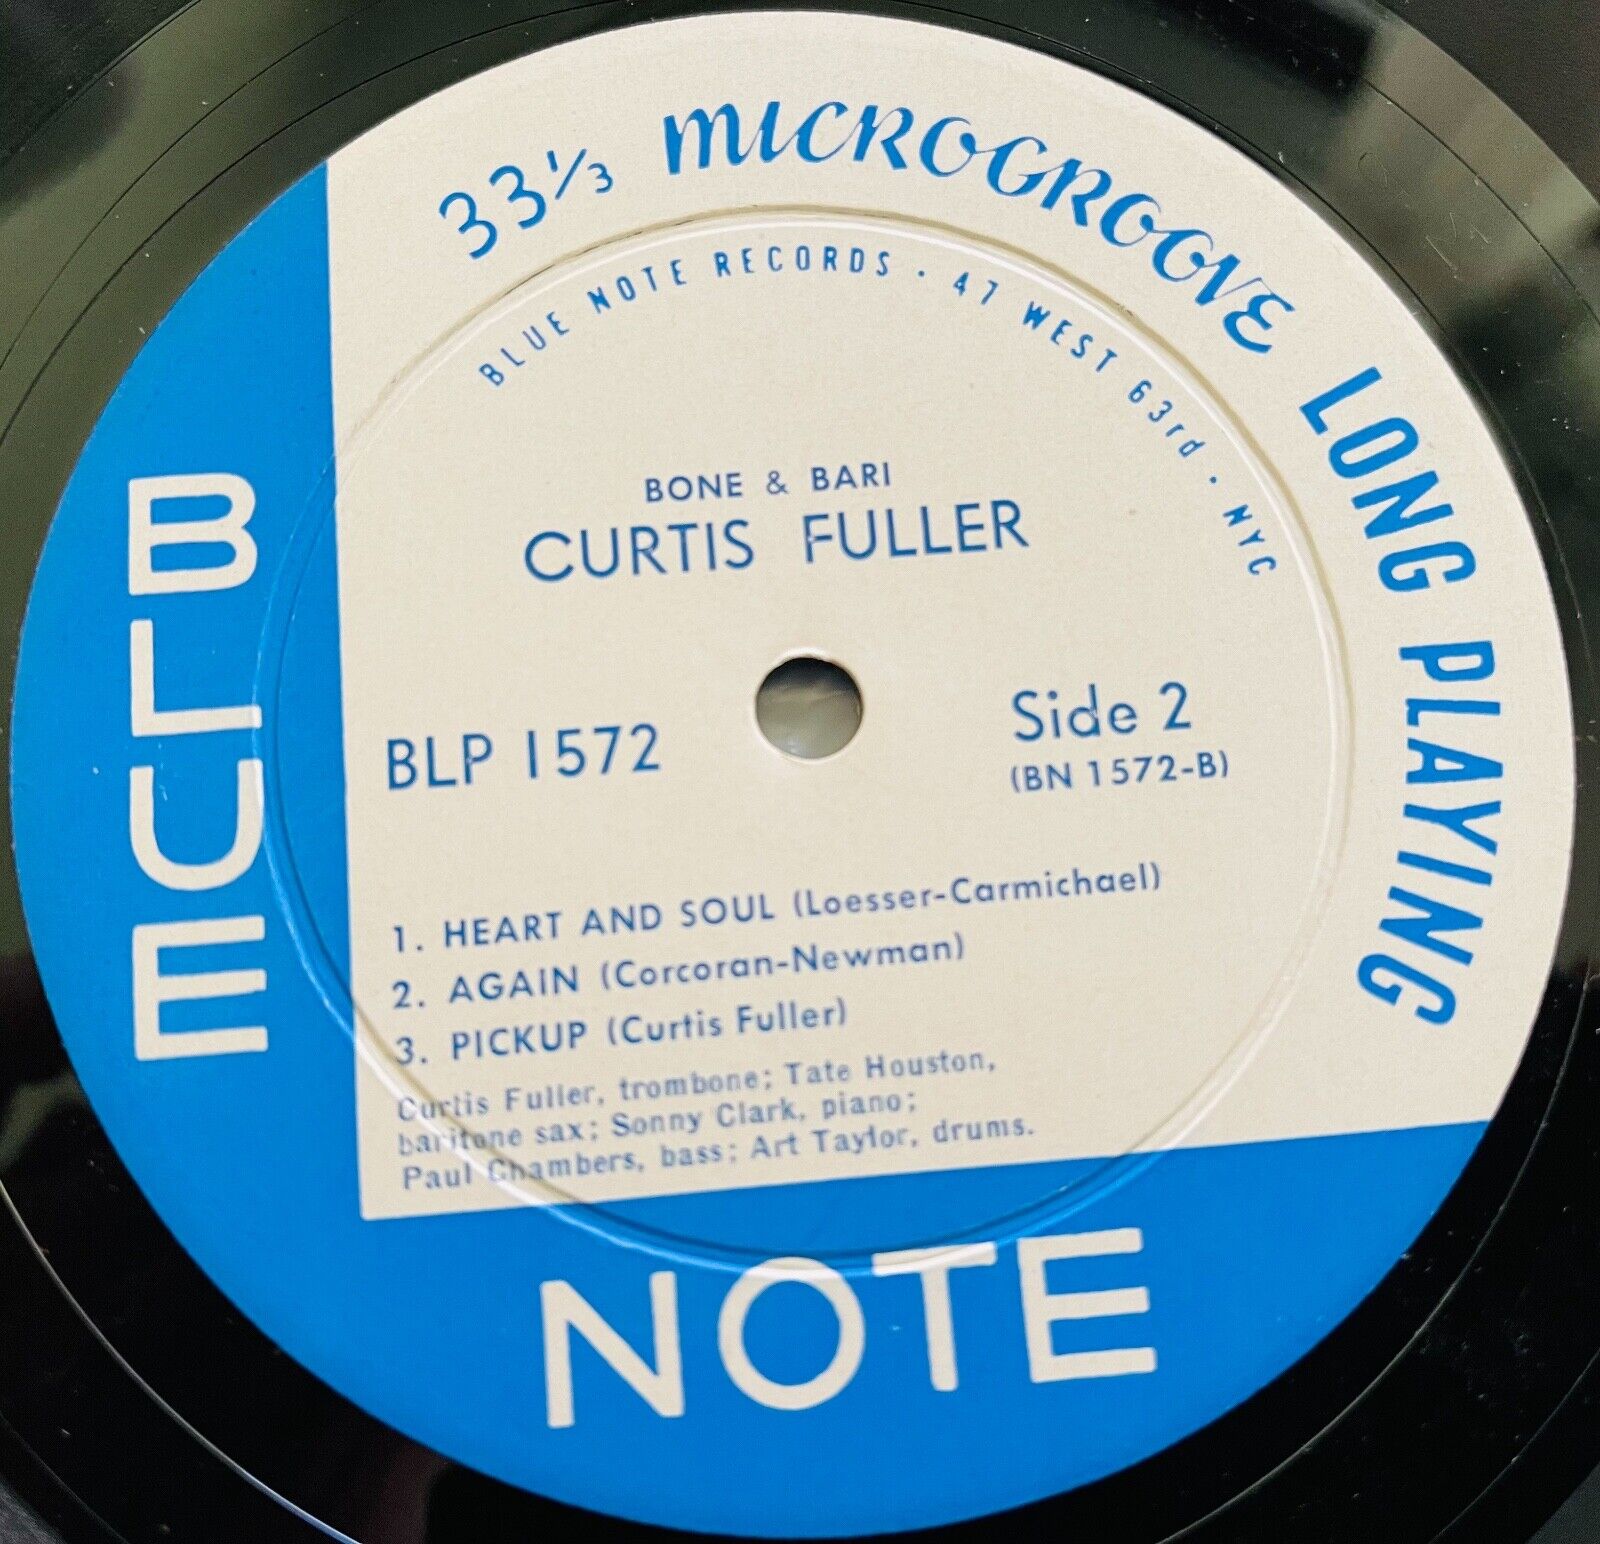 Pic 4 CURTIS FULLER - BONE & BARI - BLUE NOTE -FIRST MONO EDITION -LOOKS NEAR UNPLAYED